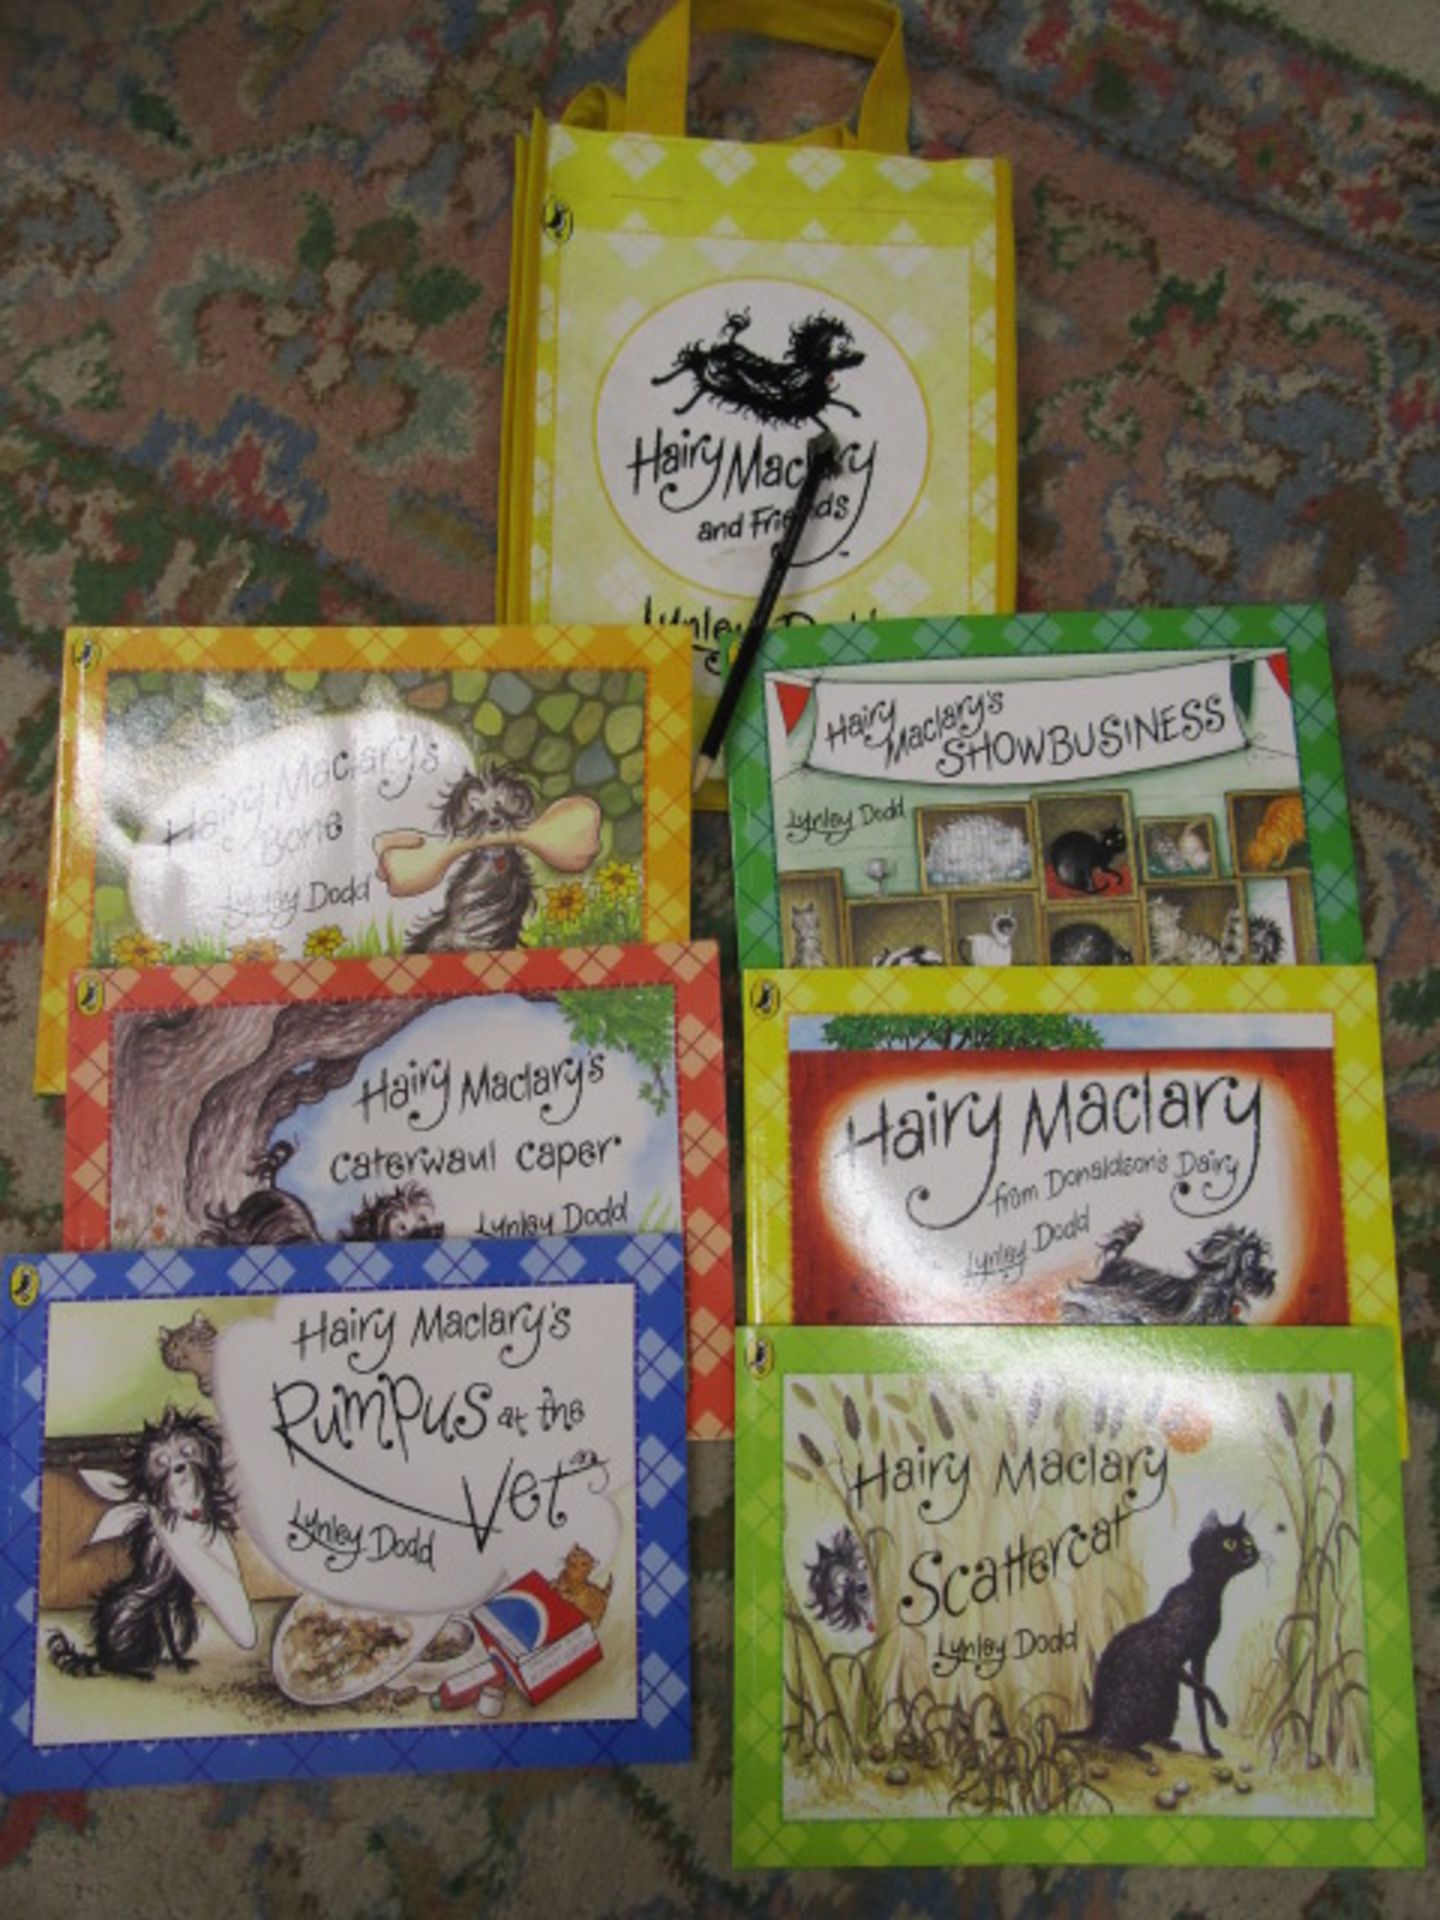 Hairy Maclary by Lynley Dodd set 6 books in bag